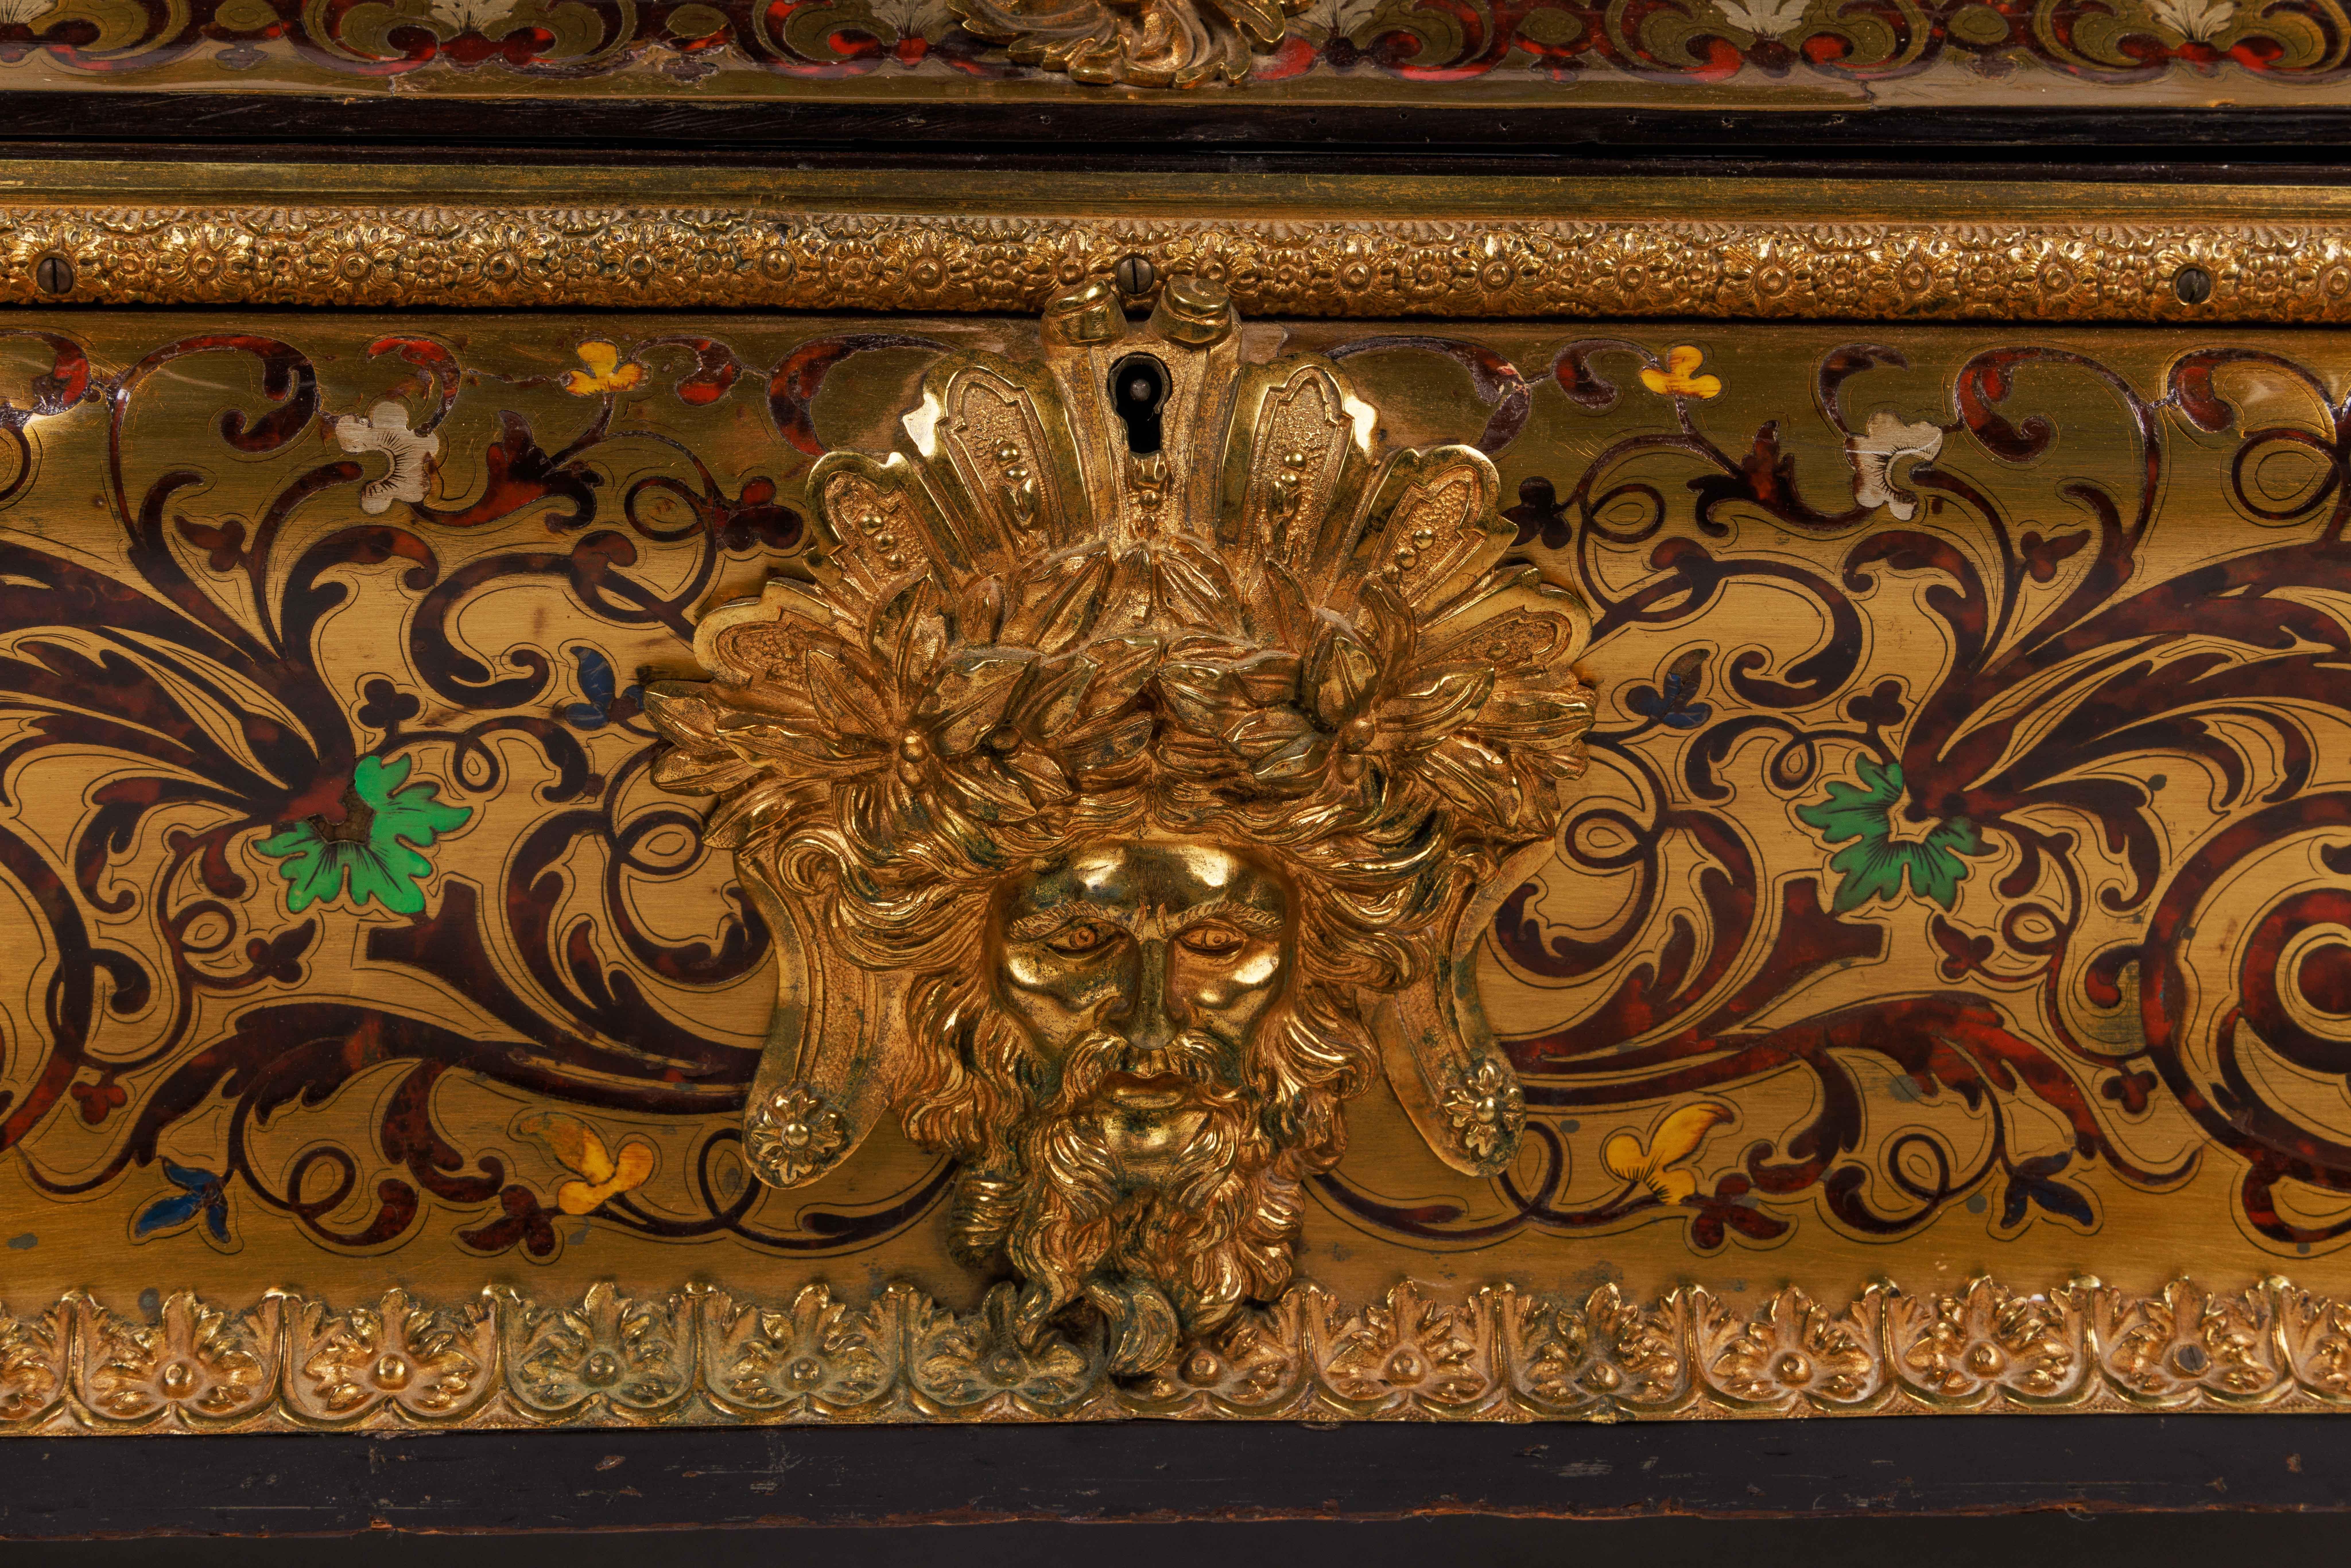 A Monumental Louis XIV style French gilt-bronze mounted wood boulle marquetry casket box, circa 1895

Known in French as a carré de toilette, this casket has canted corners with lavish gilt bronze-mounts and is richly decorated with boulle marquetry